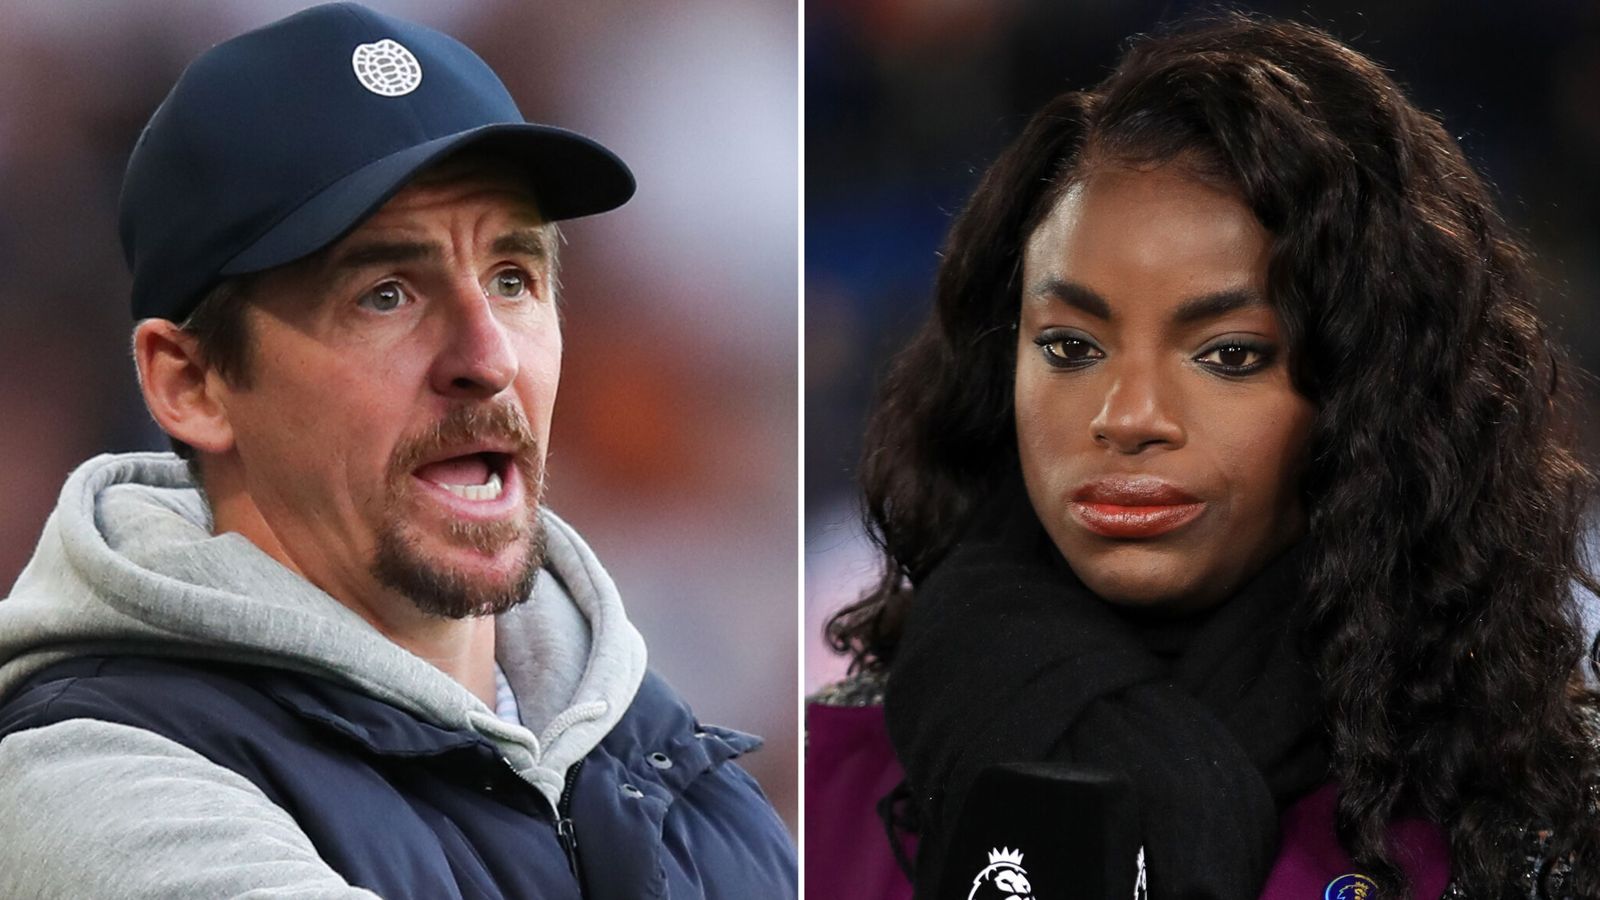 Joey Barton insults left Eni Aluko 'scared to go out' - and former Lioness says she's 'considering legal action'